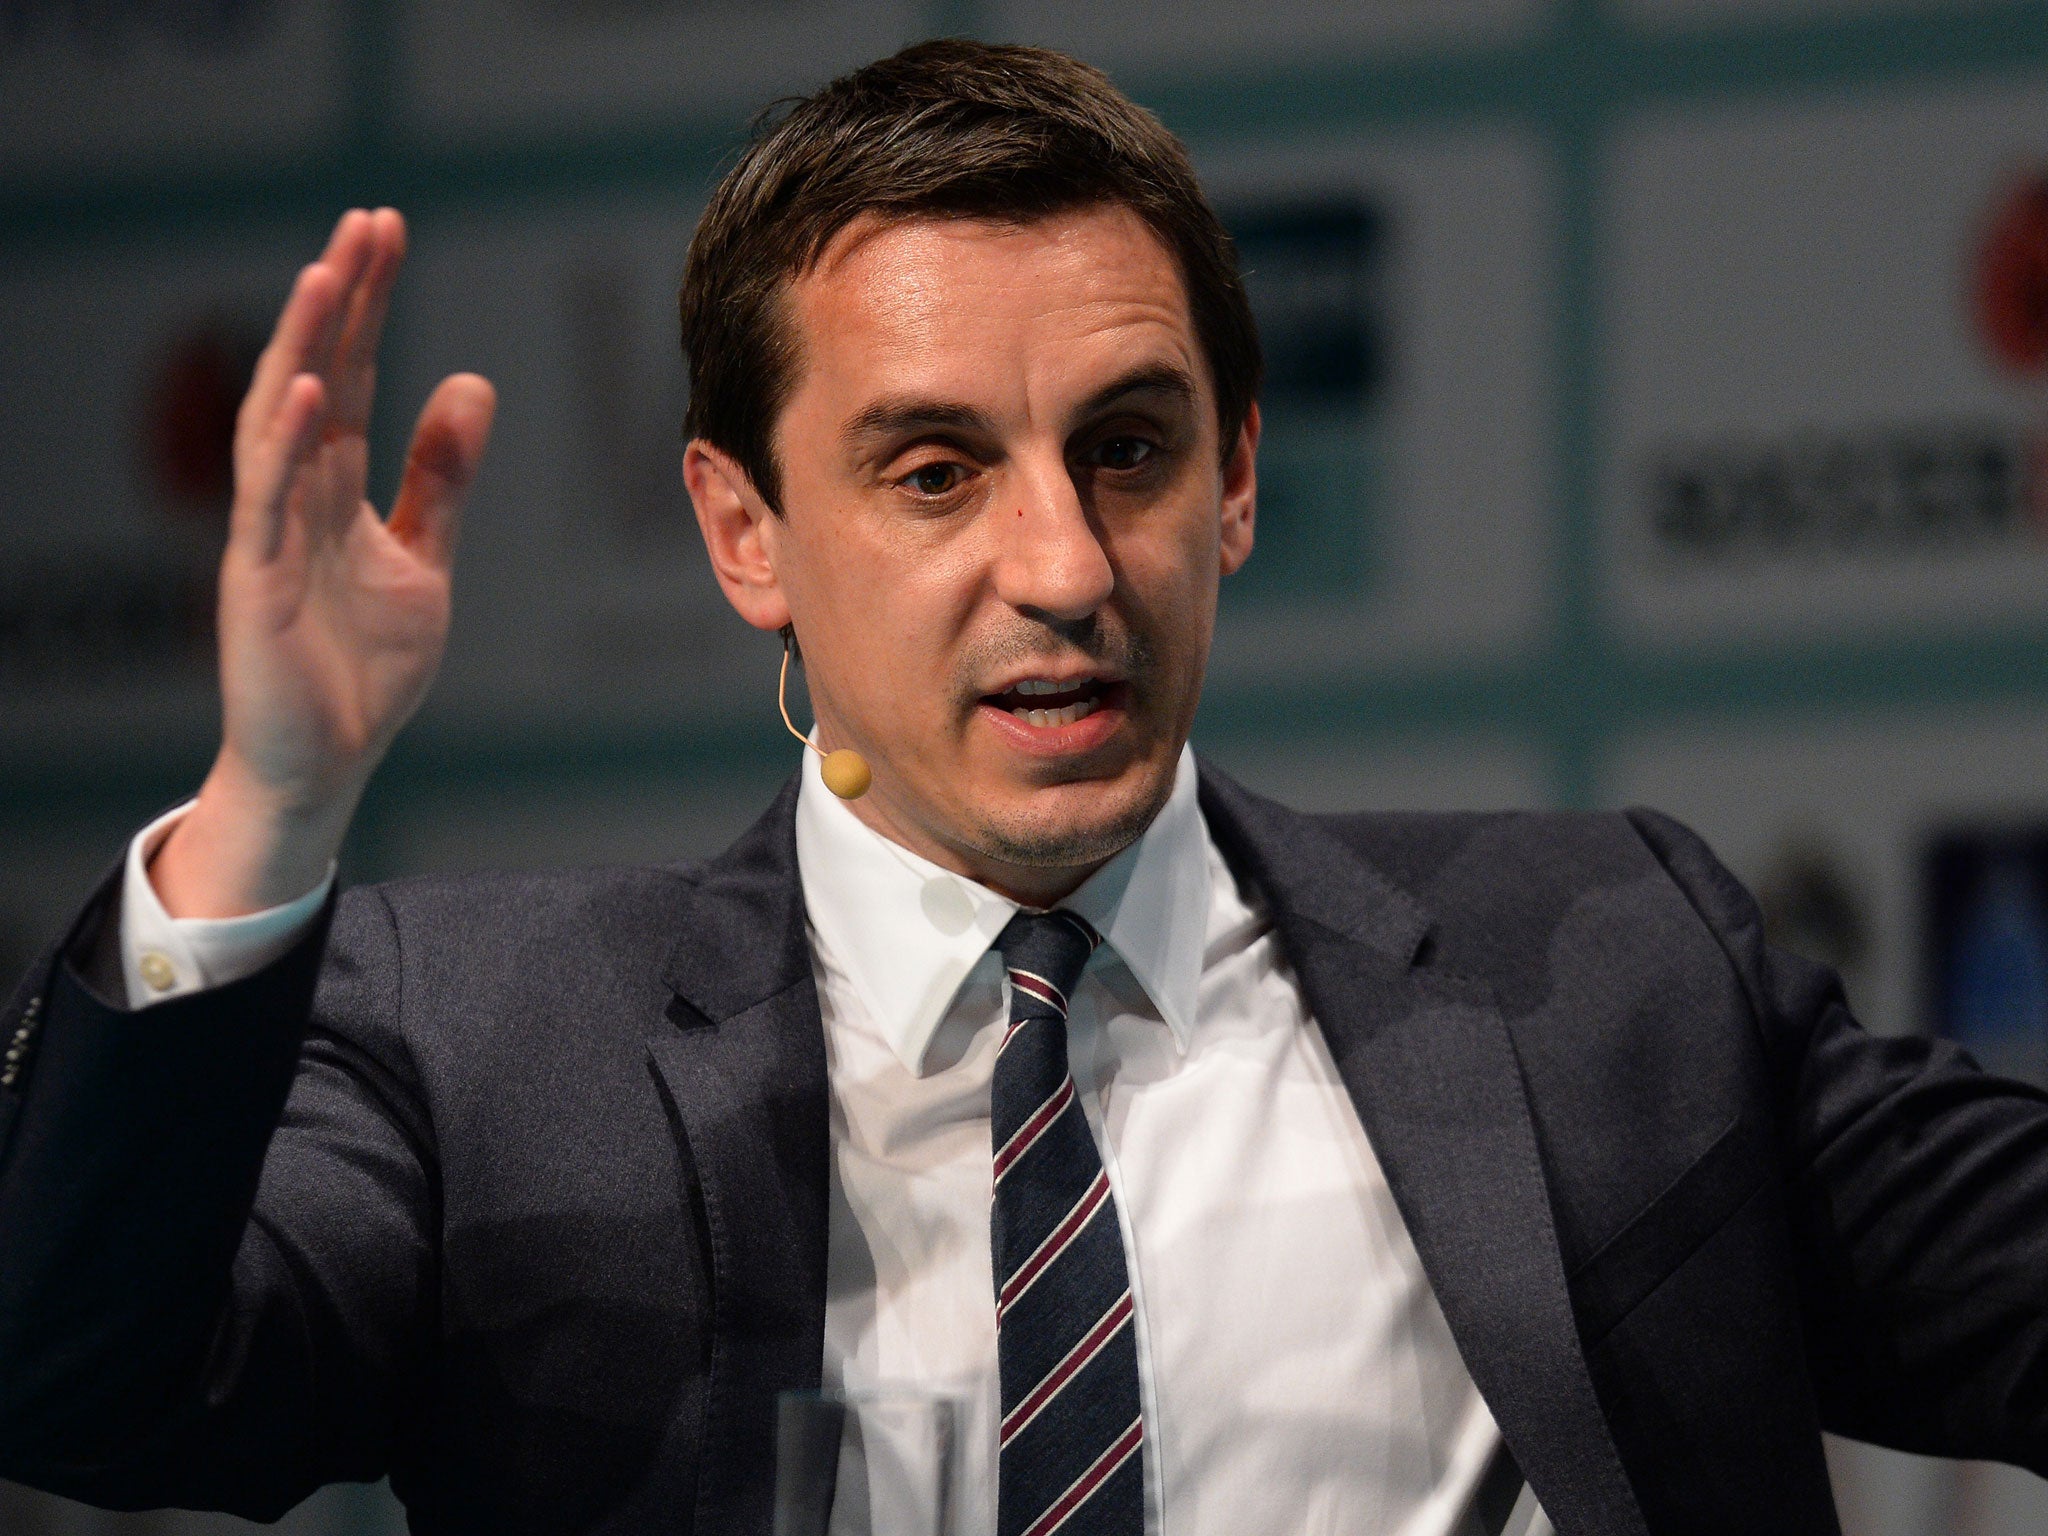 Gary Neville was a great pundit with solid good sense